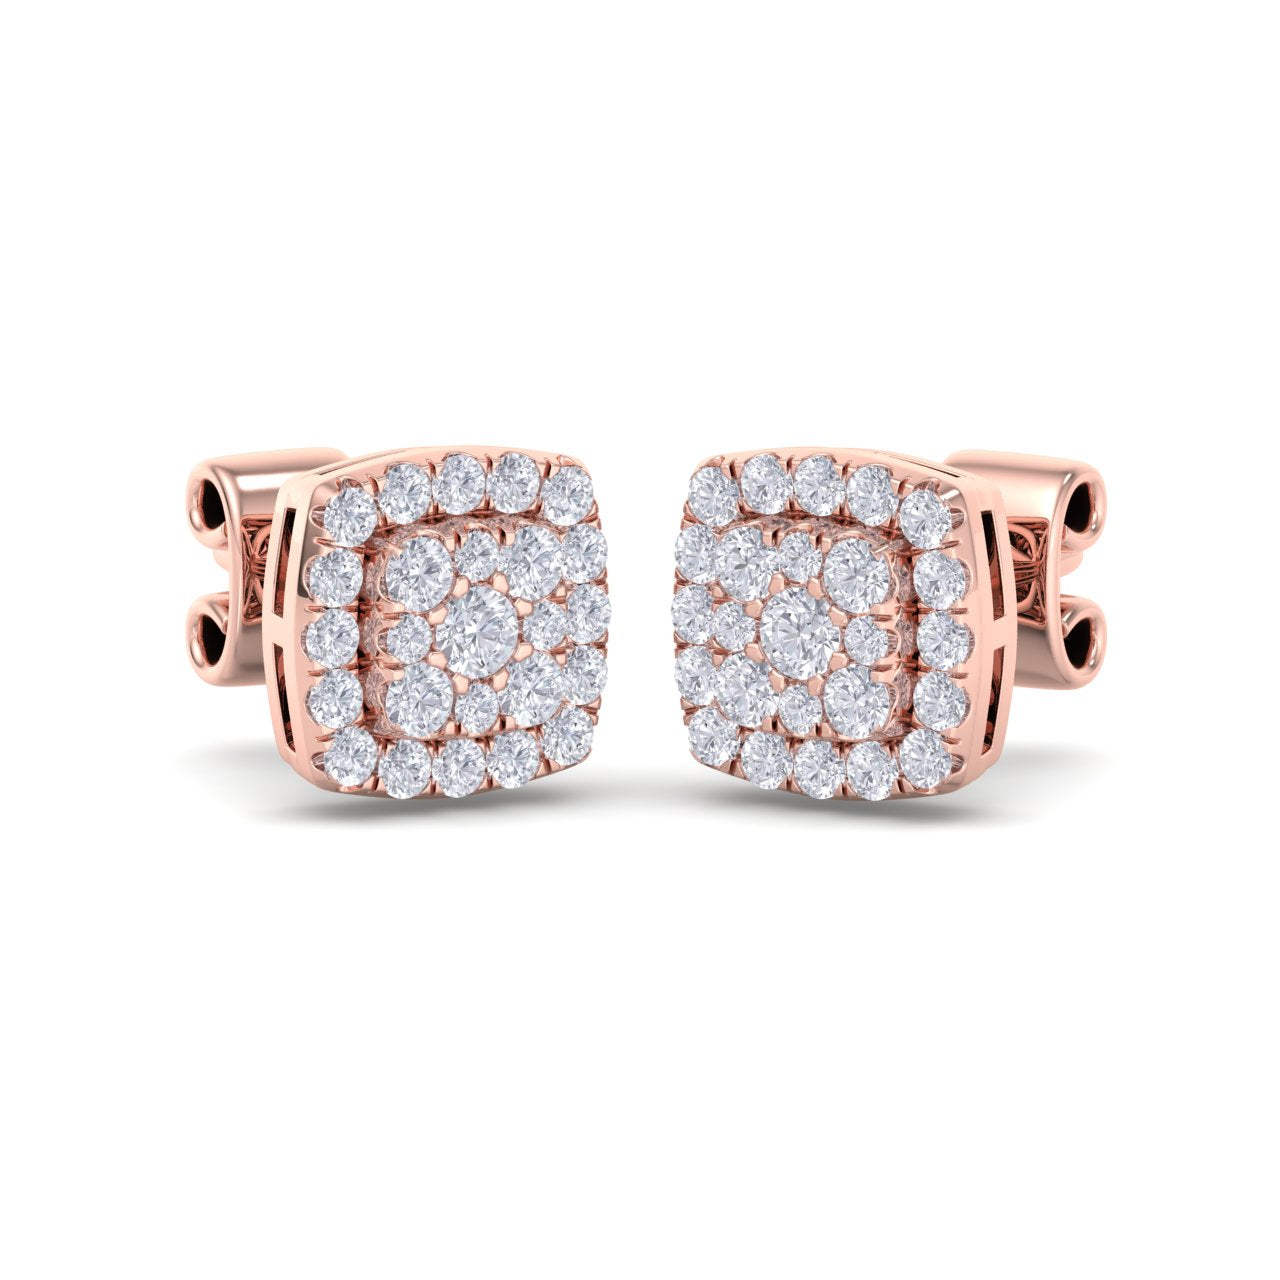 Square stud diamond earrings in yellow gold with white diamonds of 0.50 ct in weight